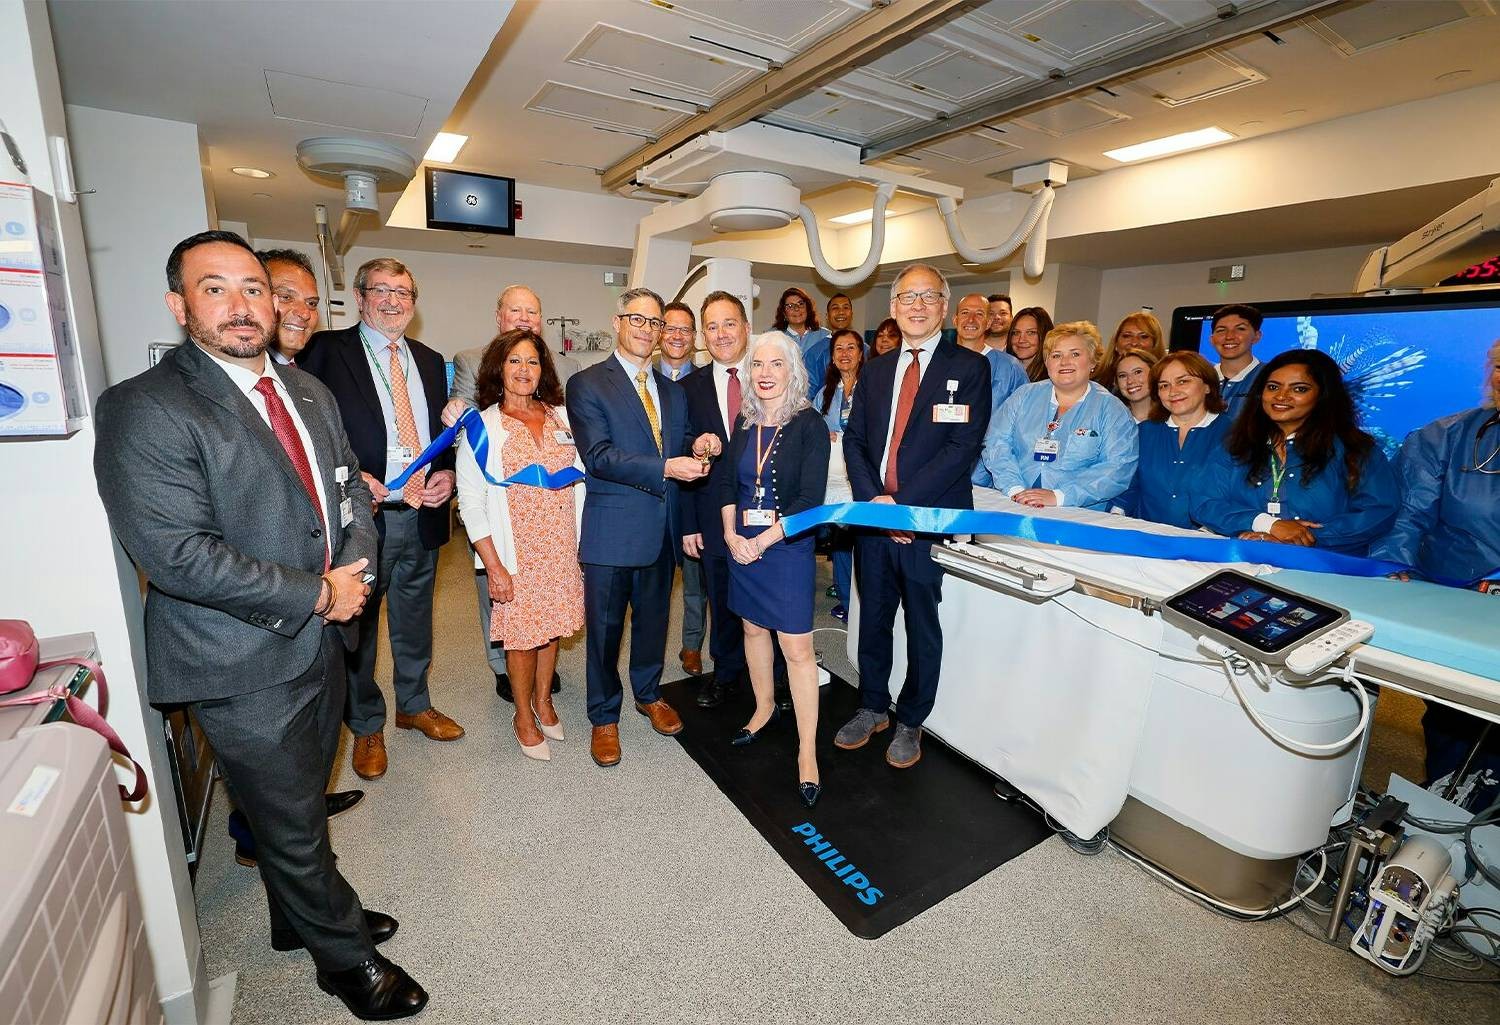 Innovative care continues to expand with a state-of-the-art cardiac cath lab joining Plainview Hospital.